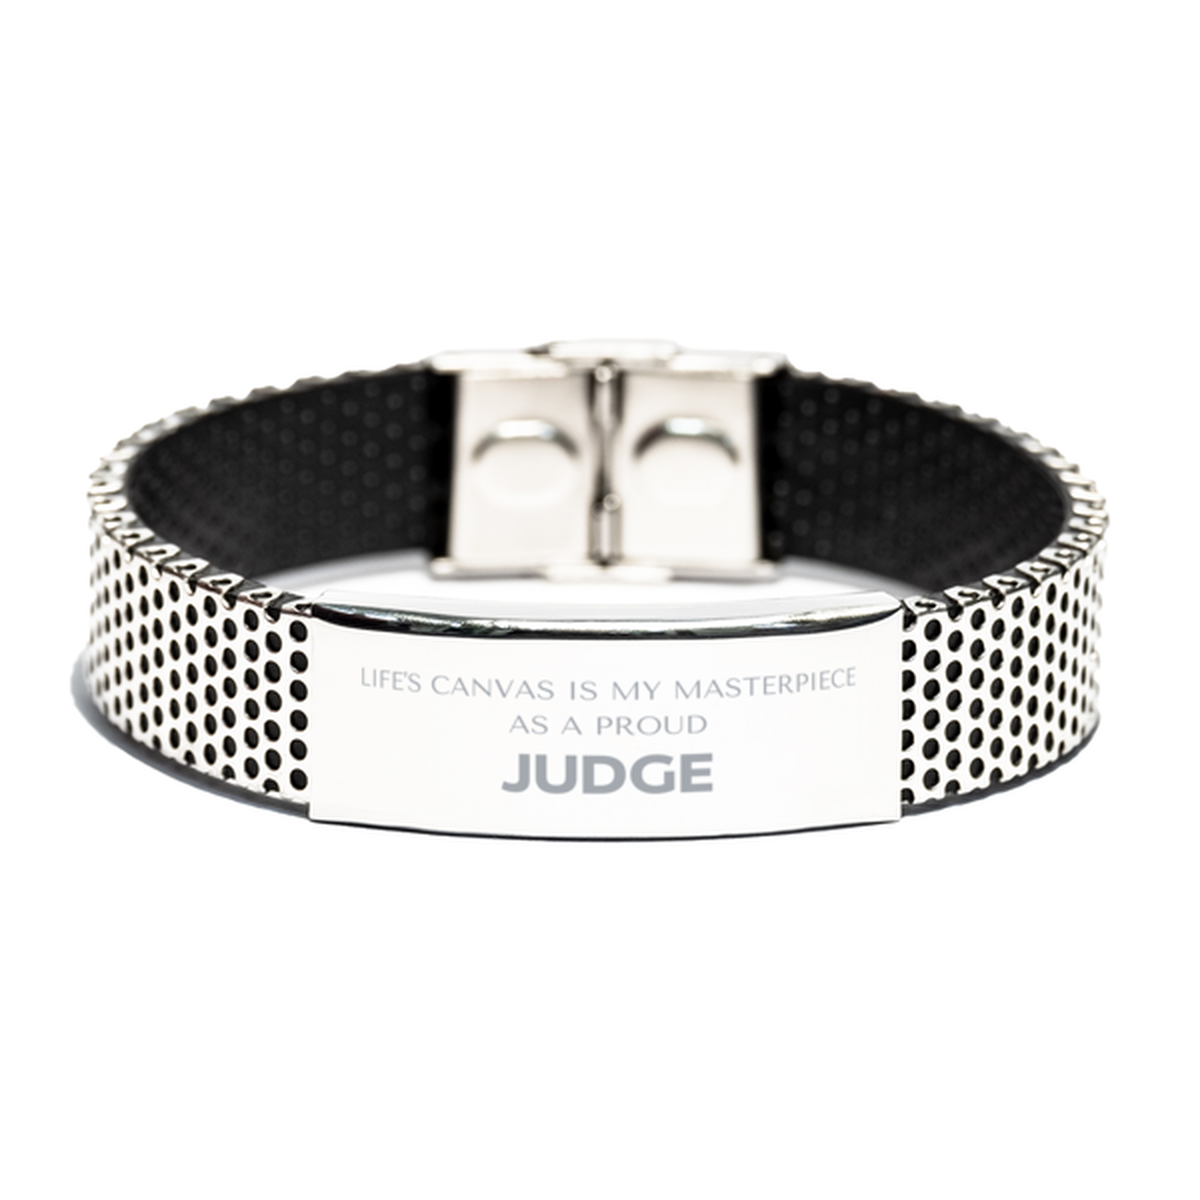 Proud Judge Gifts, Life's canvas is my masterpiece, Epic Birthday Christmas Unique Stainless Steel Bracelet For Judge, Coworkers, Men, Women, Friends